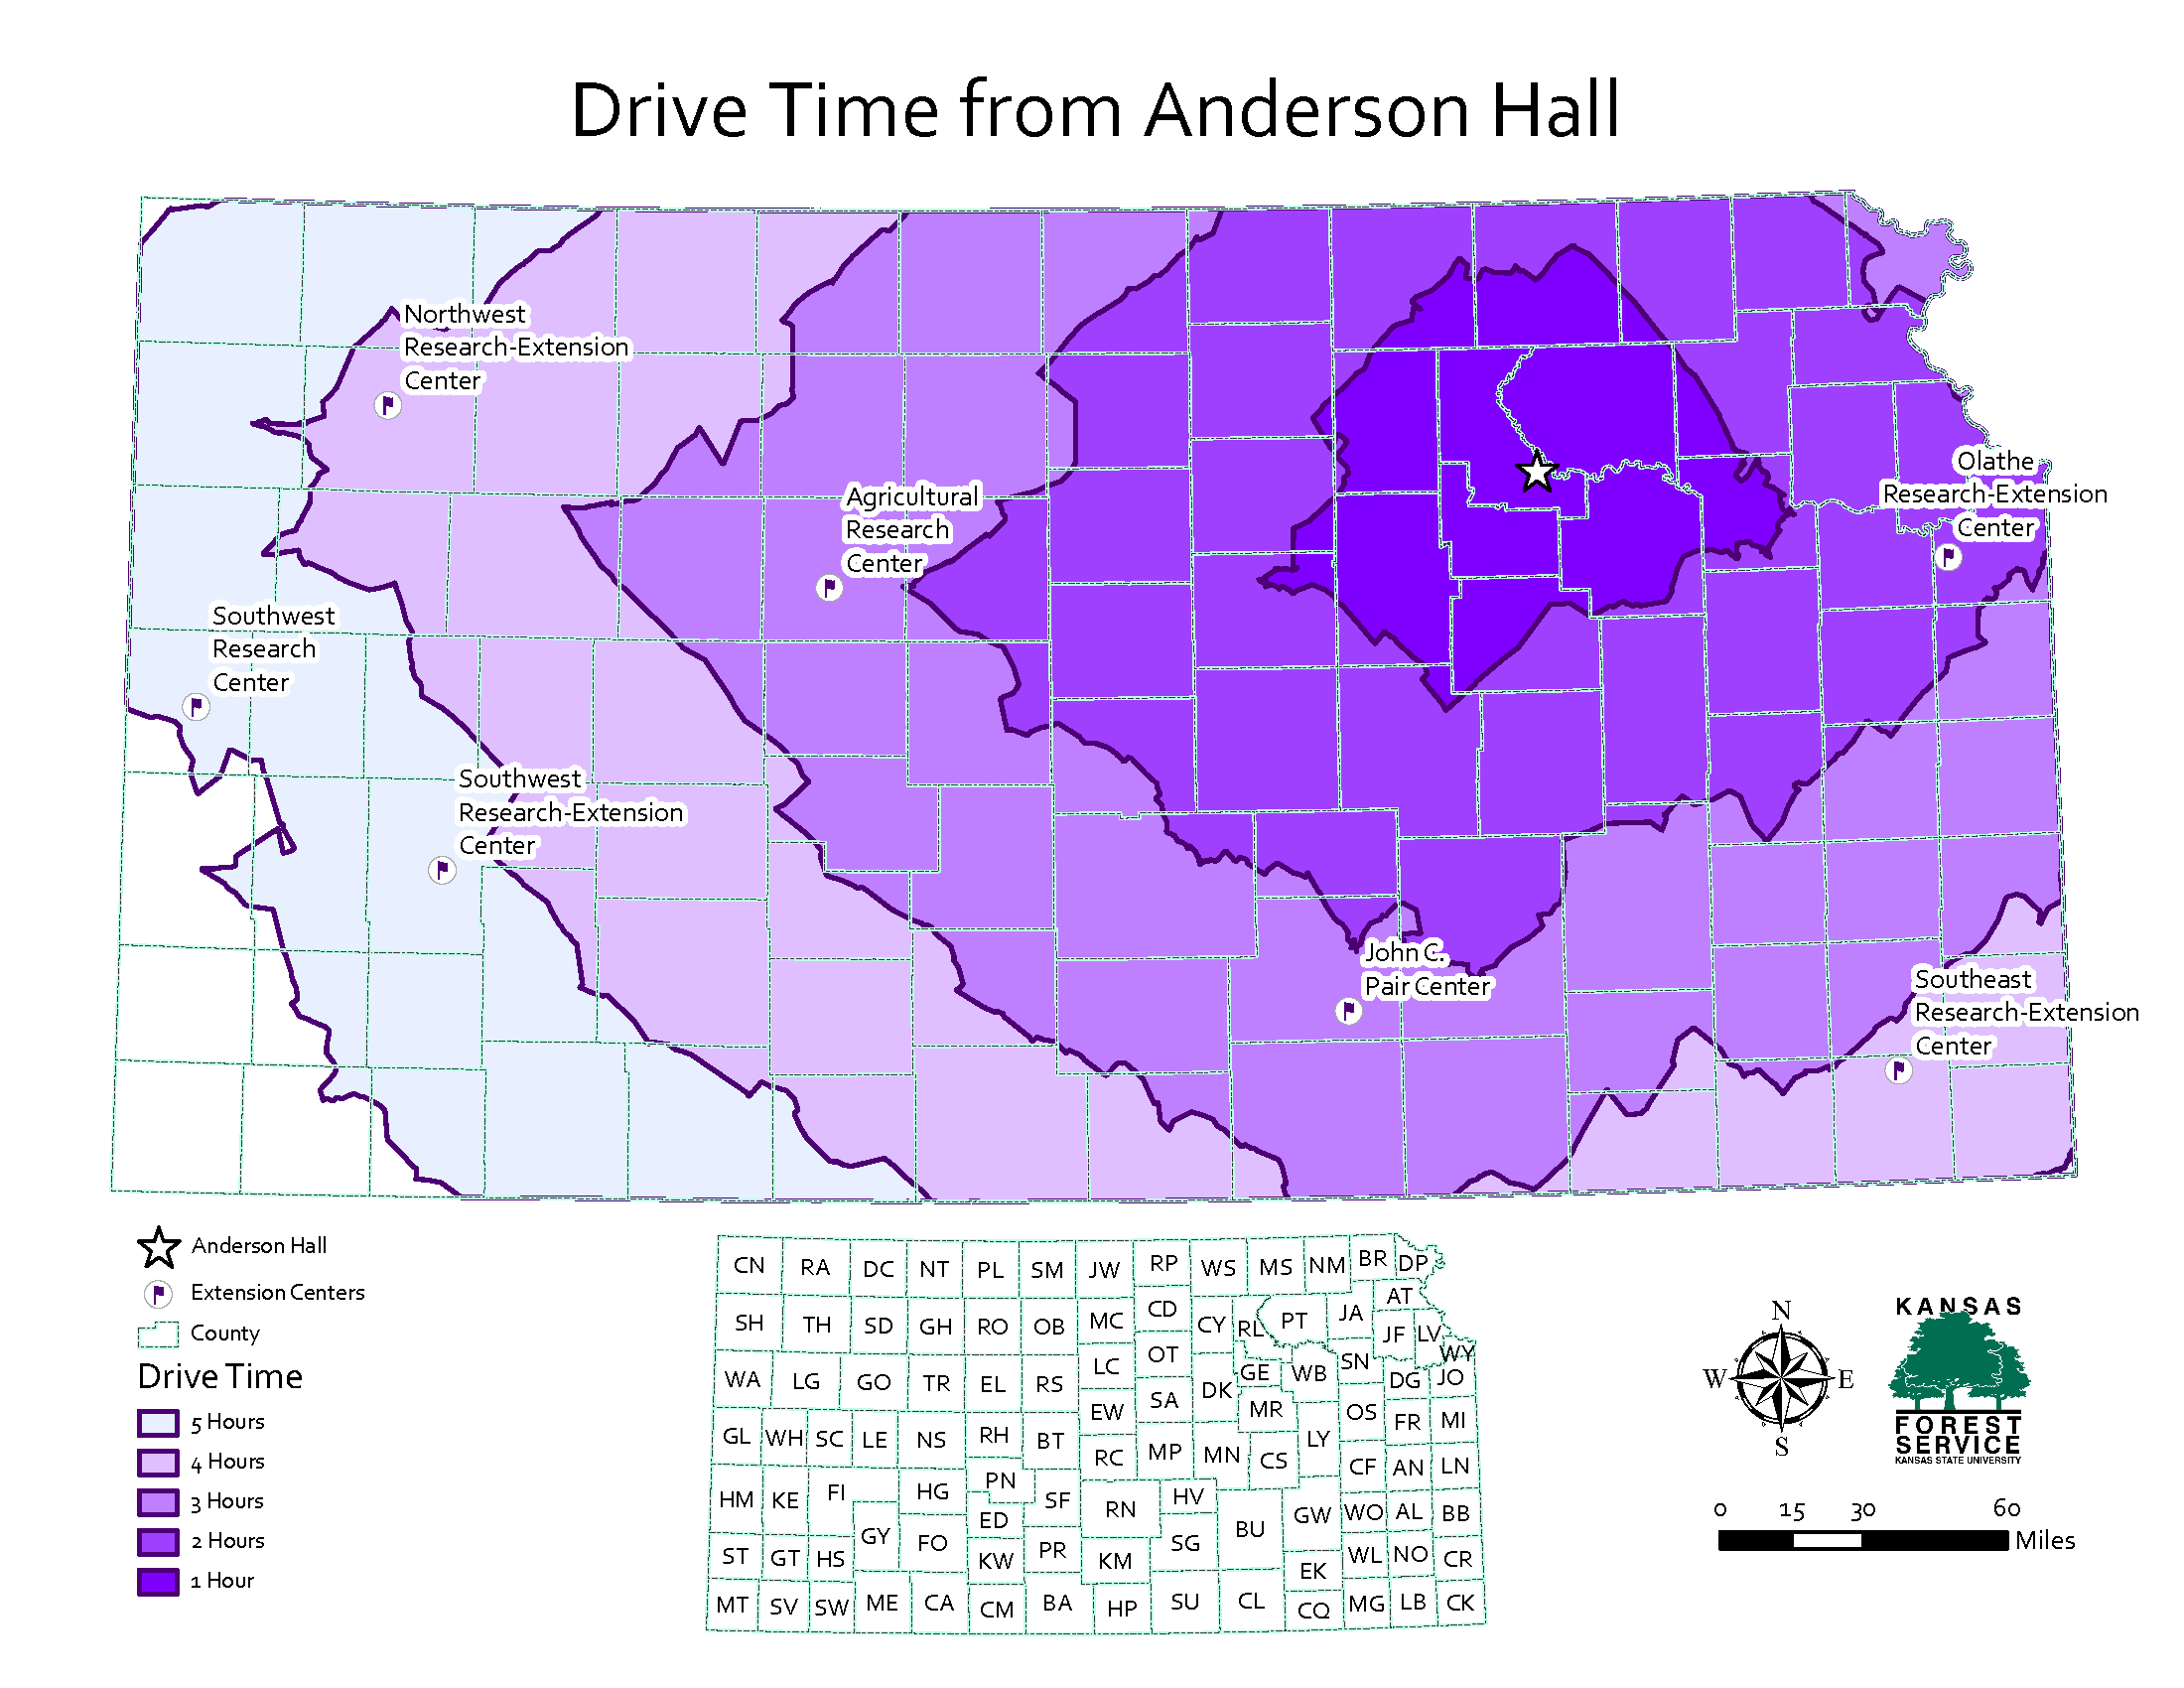 A heat map of the state of Kansas, showing the drive time from Anderson Hall (indicated by a star in the upper right hand corner). Bands of purple show different drive times, with the darkest purple the closest, and four different shades radiating outward.